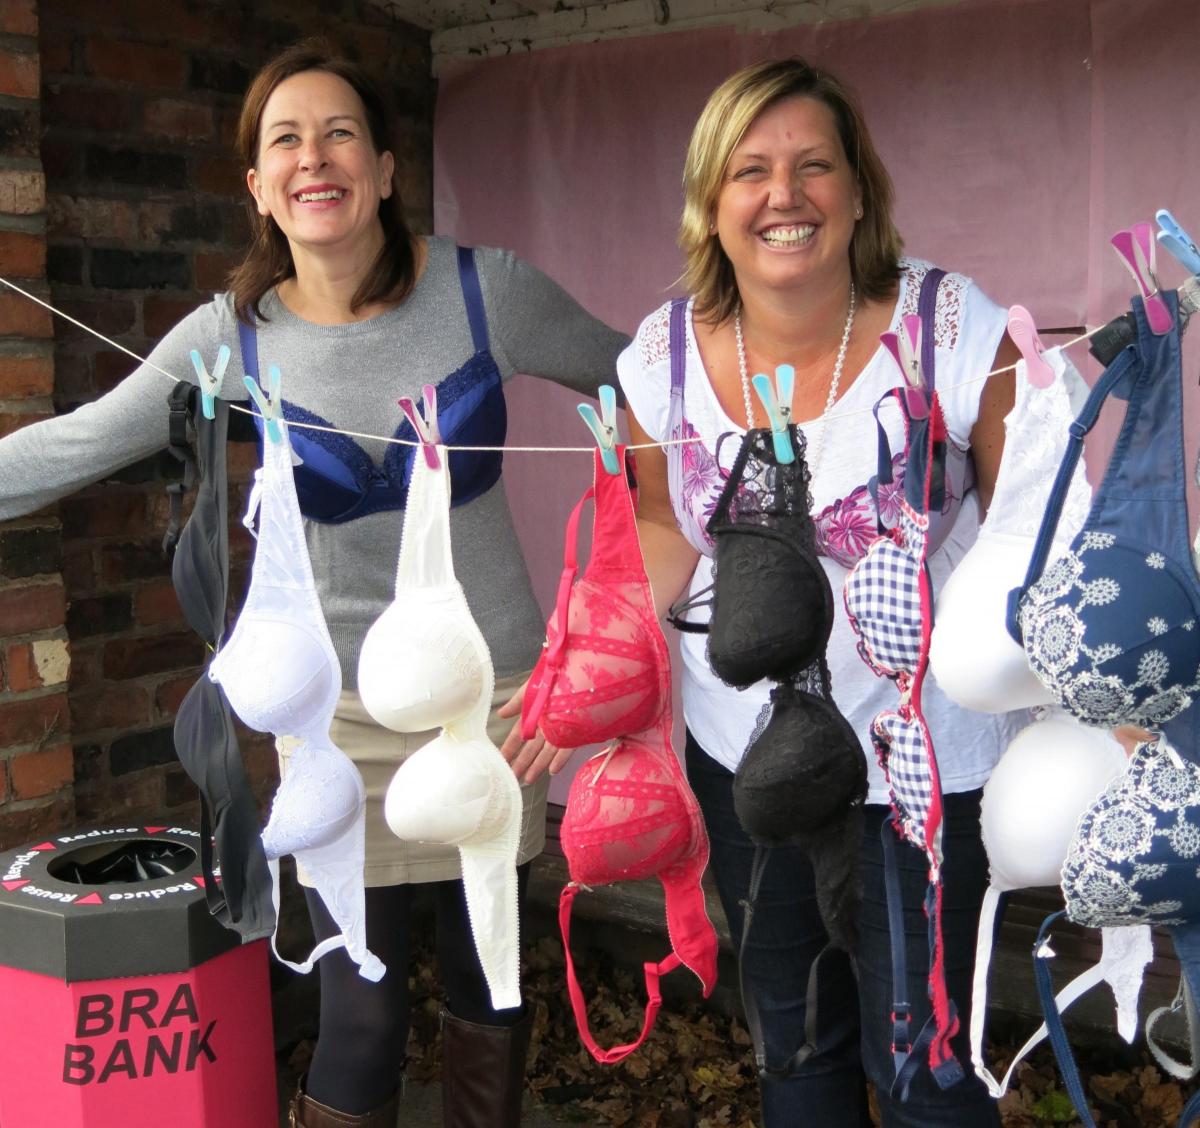 Over Peover mum sets up 'Bra Bank' to recycle disused bras for charity